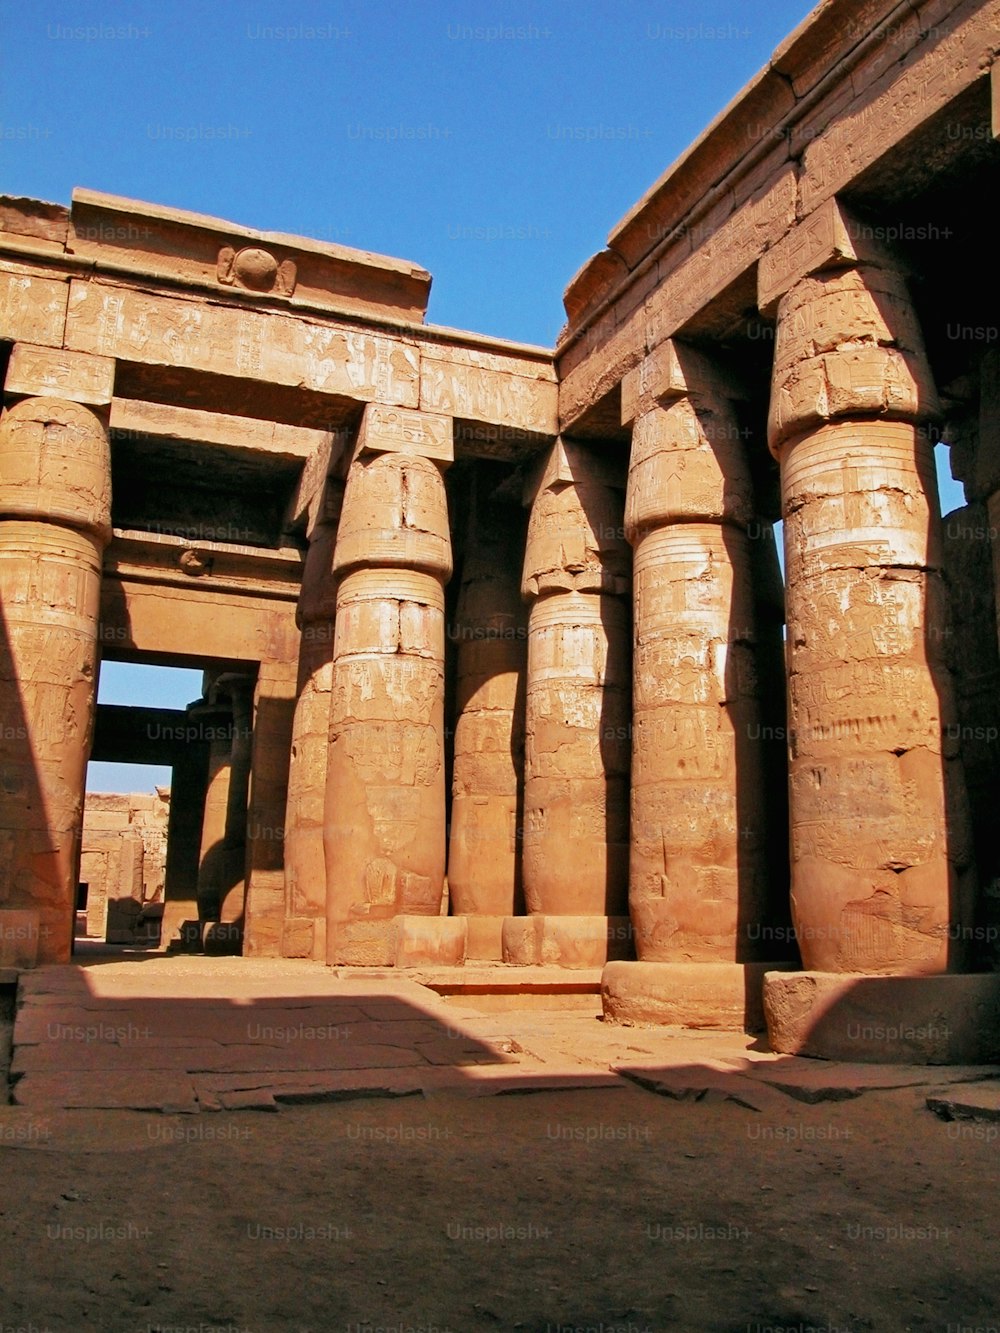 an image of an ancient building with columns